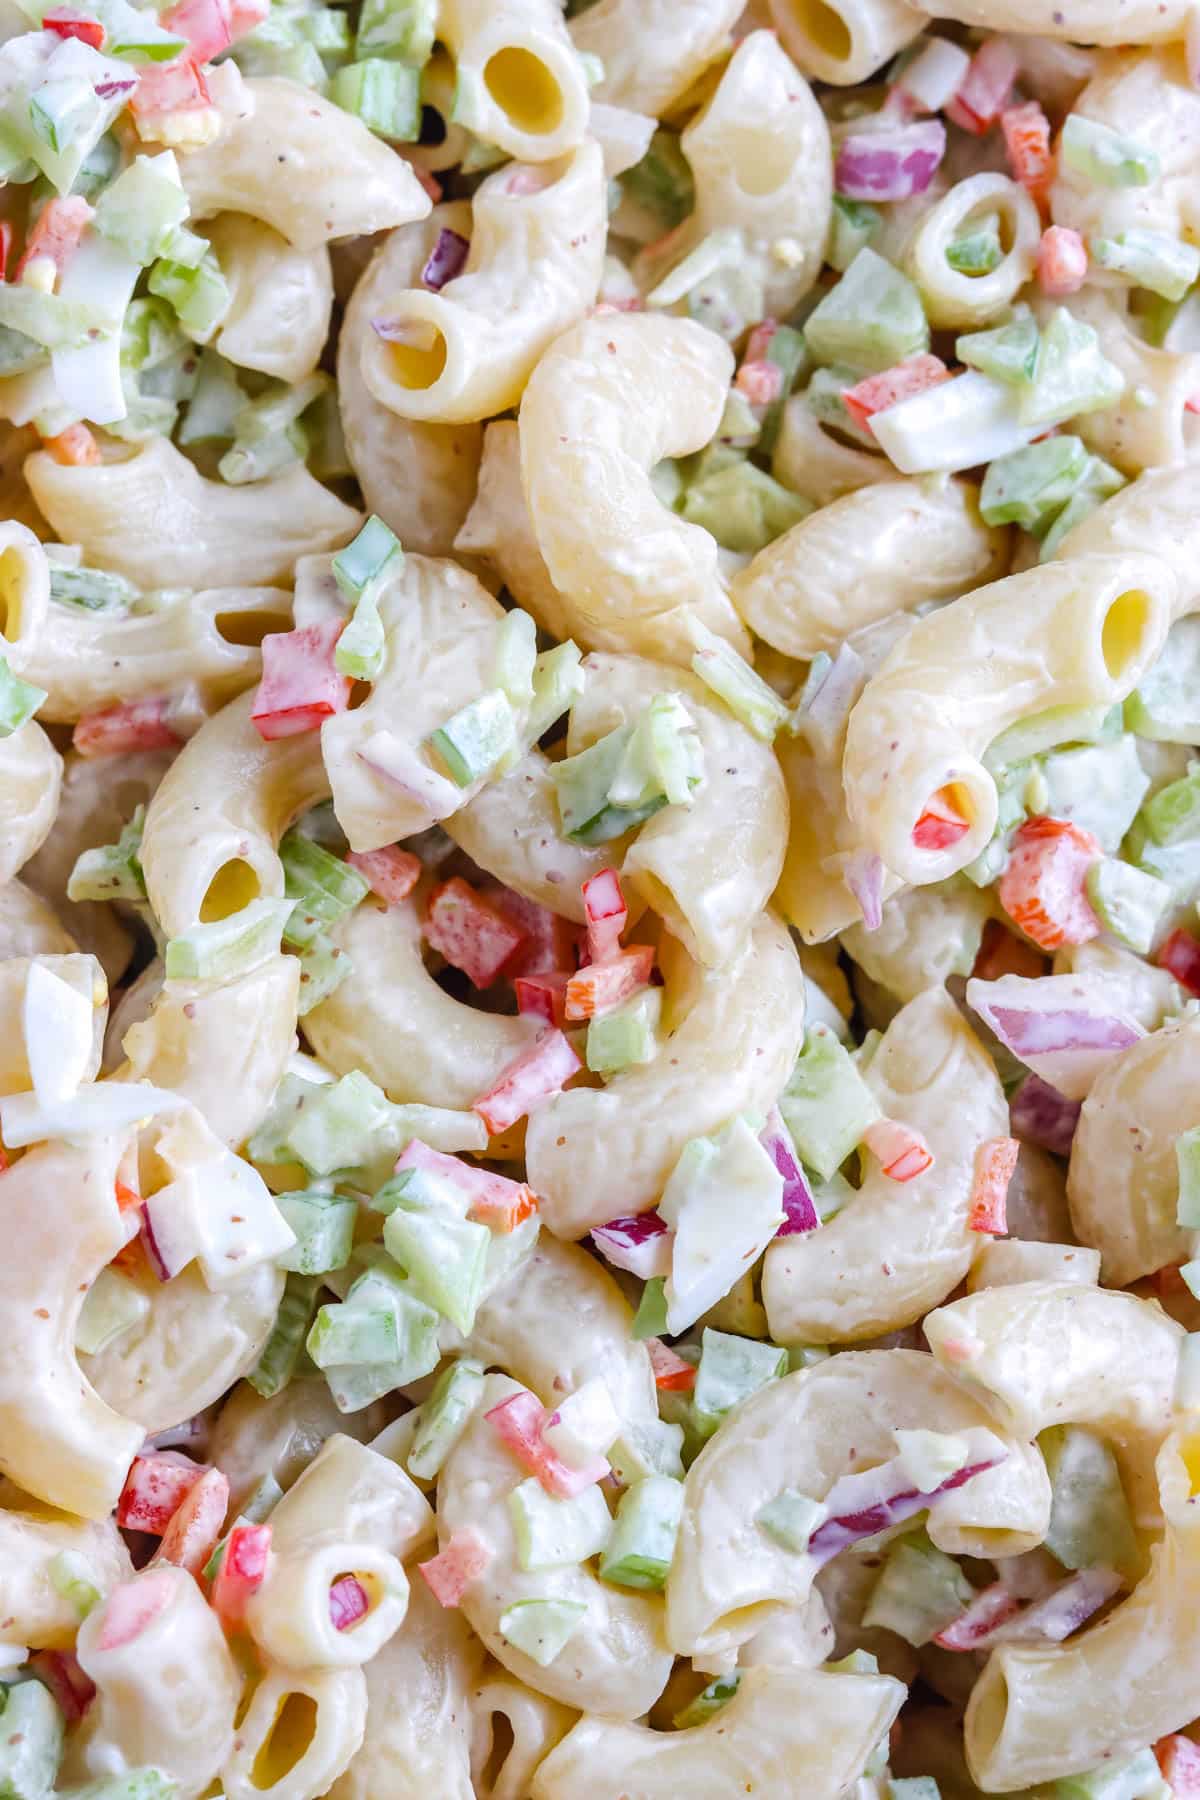 A close up picture of Deli Macaroni Salad so you can see the texture of the soft pasta and small chopped veggies.